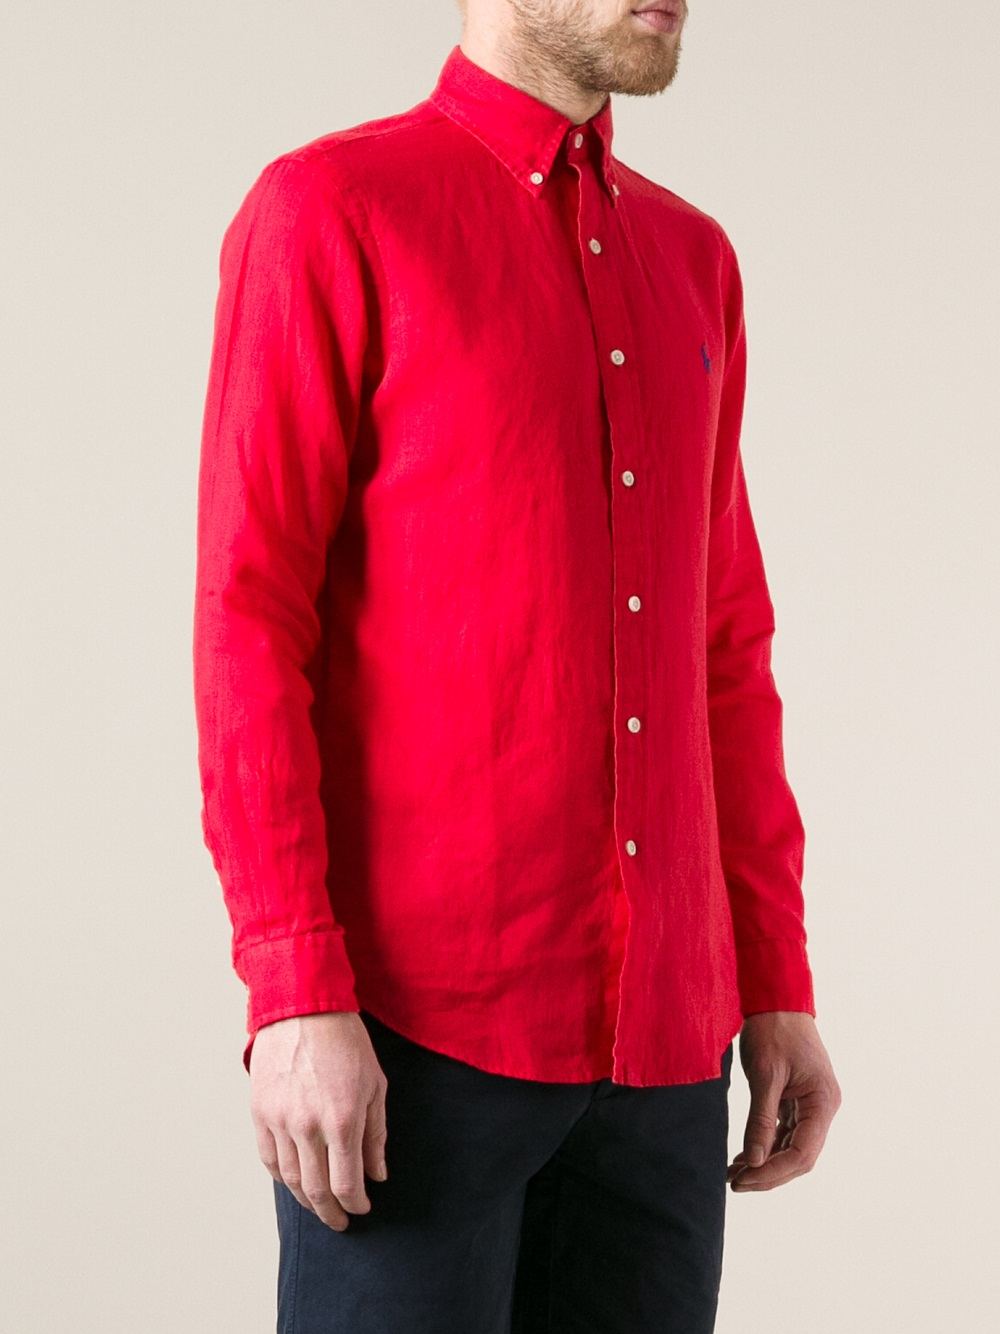 Lyst - Polo Ralph Lauren Classic Shirt in Red for Men